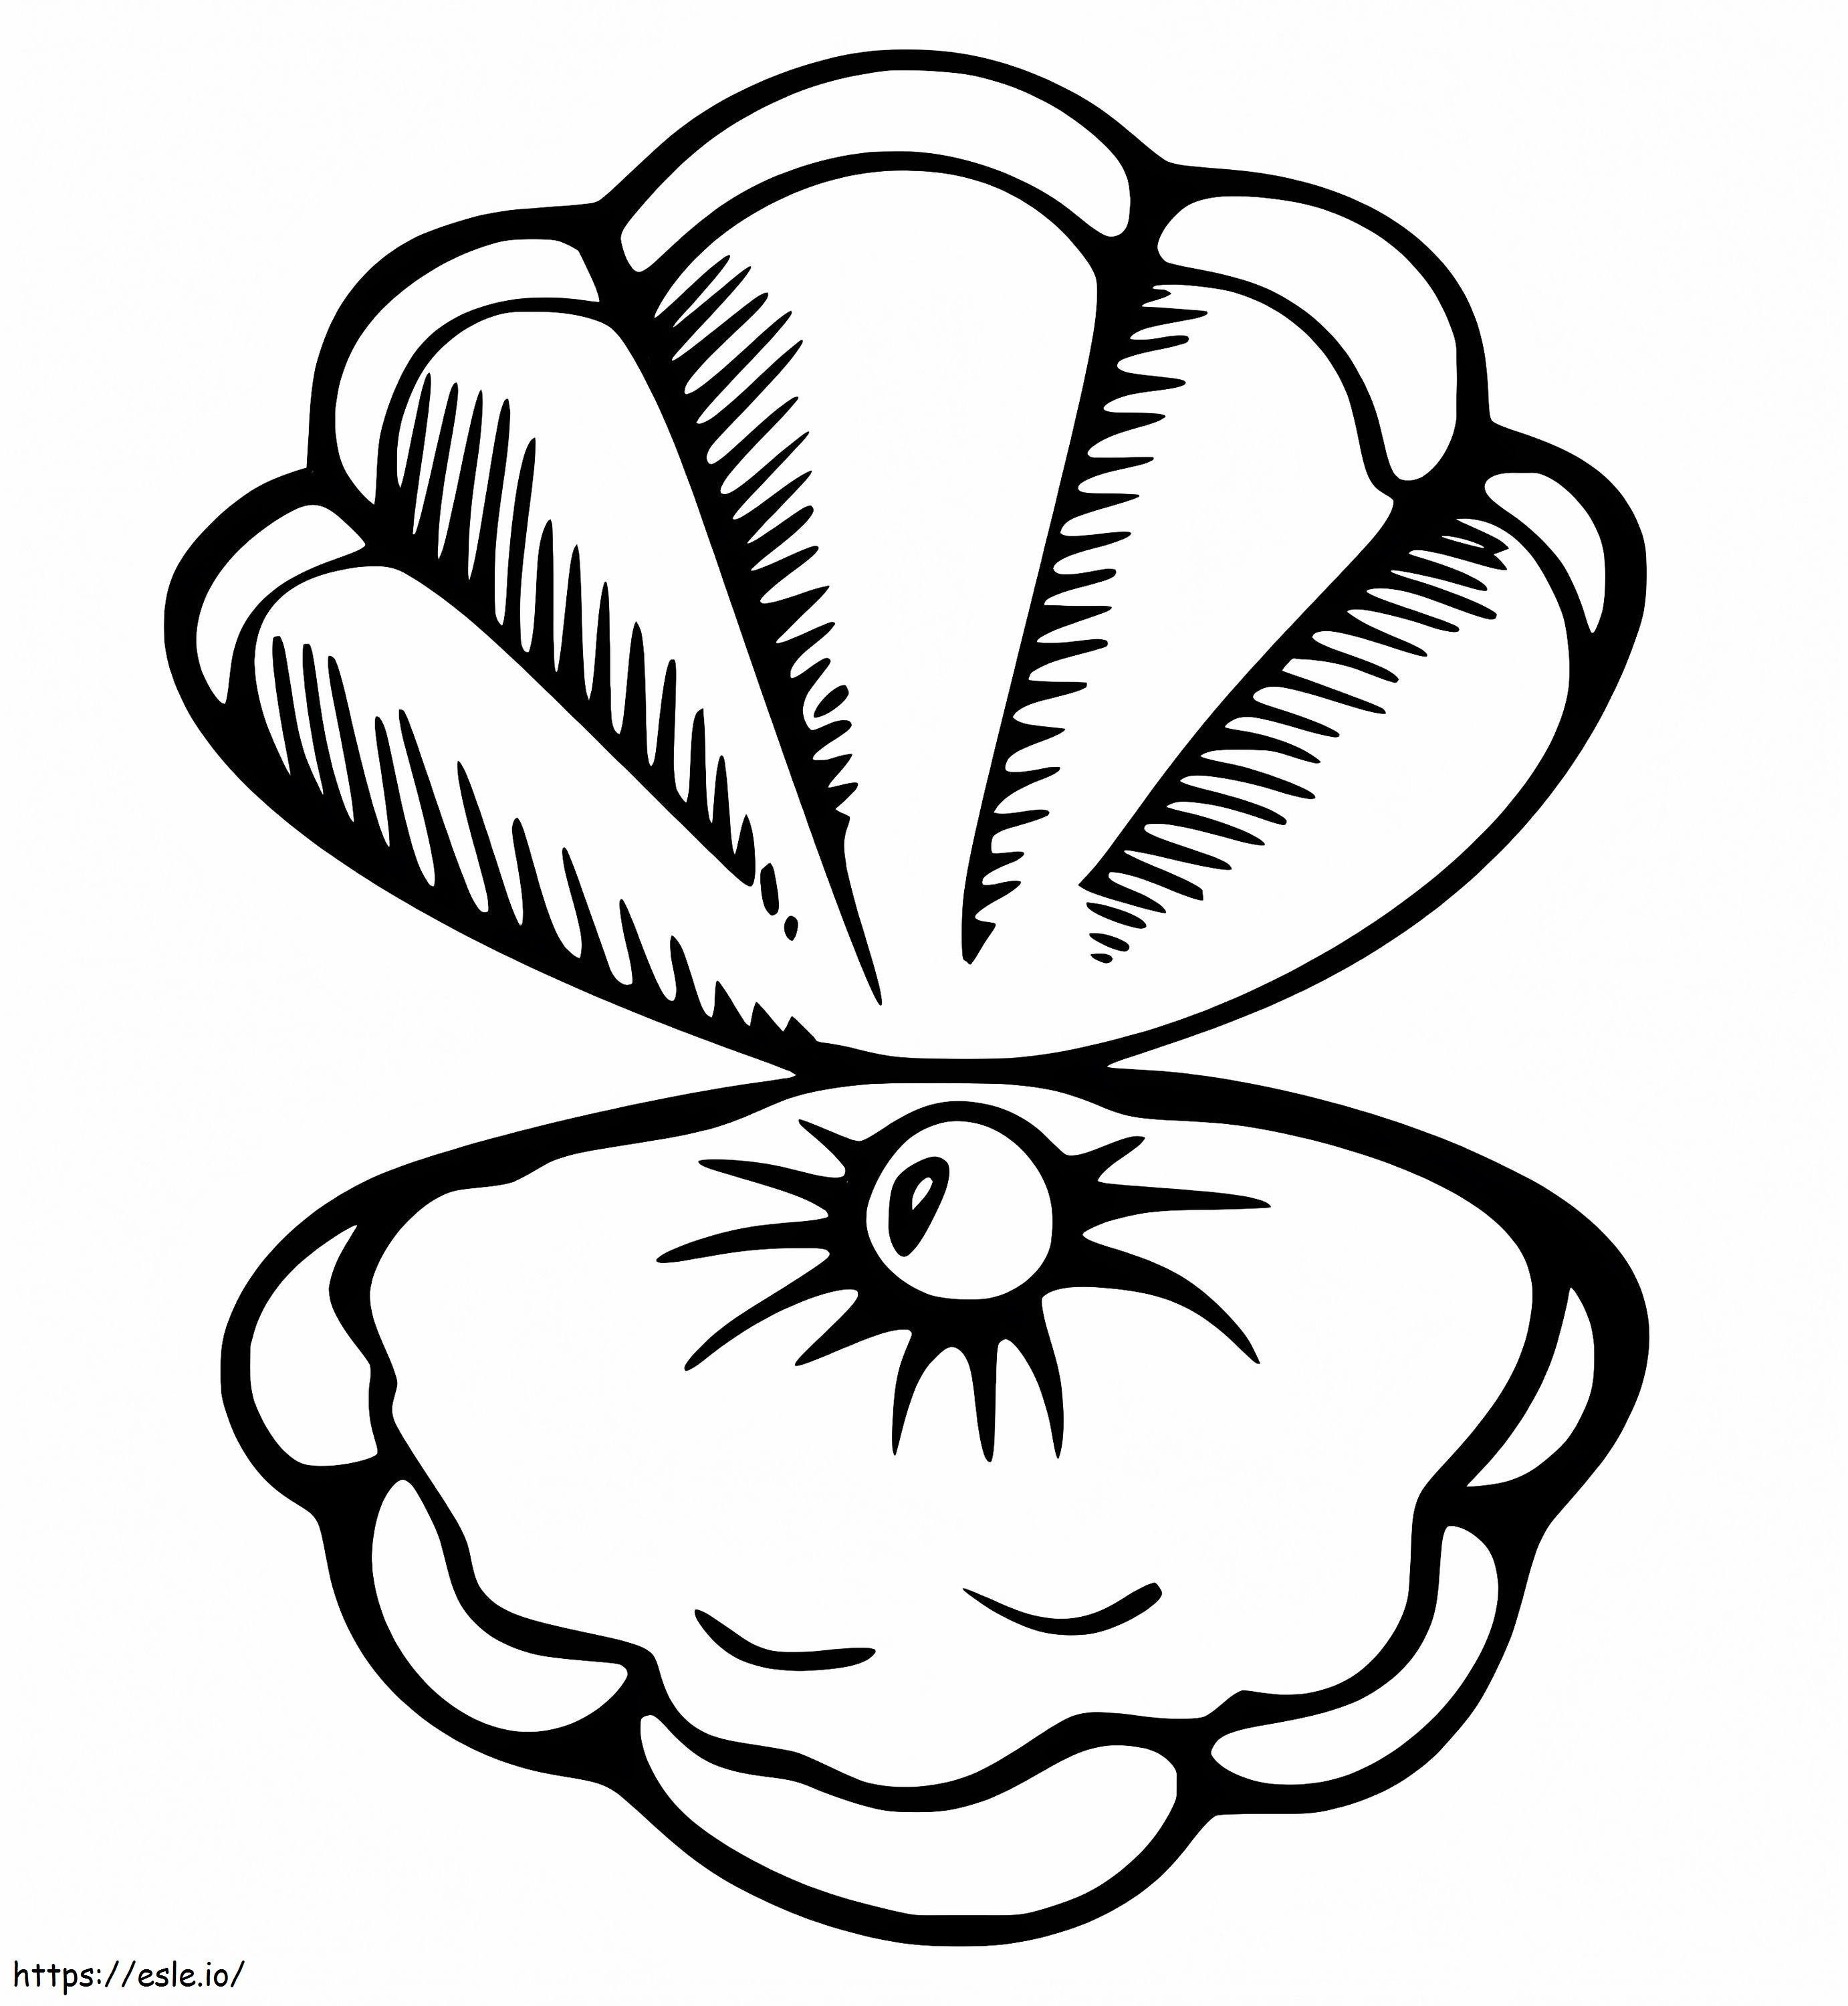 Scallop With Small Pearl coloring page